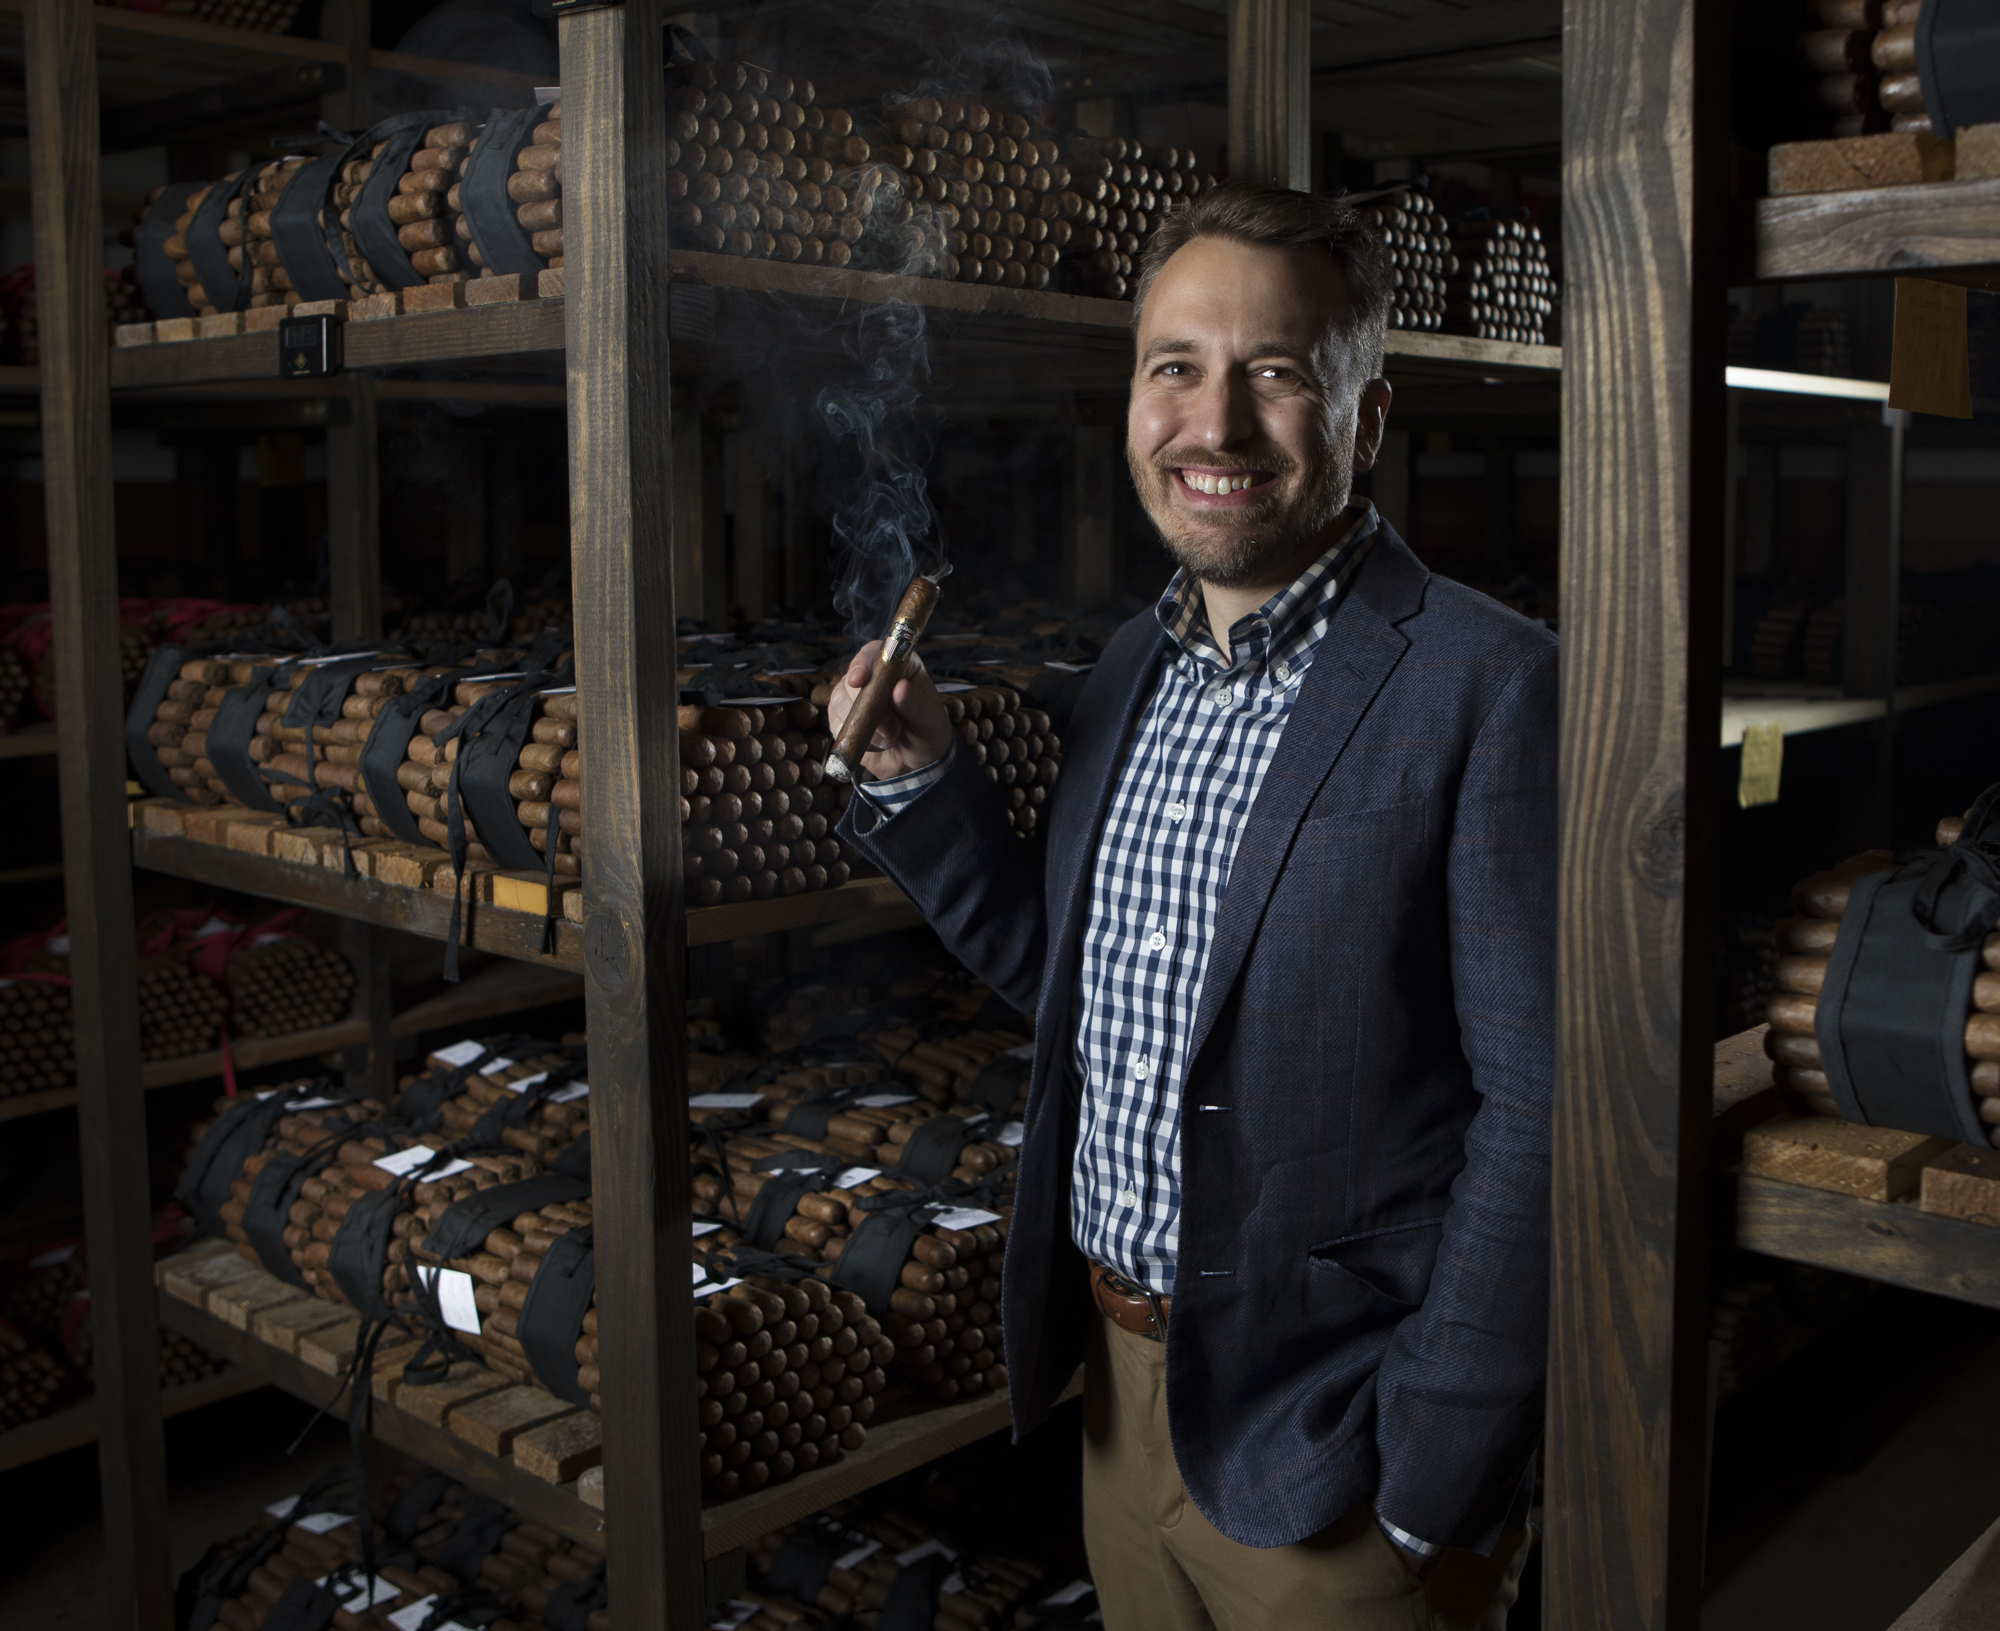 Mark Wemple. Drew Newman, an attorney by trade, fights for cigar industry rights in Washington, D.C. in addition to helping run the family business.